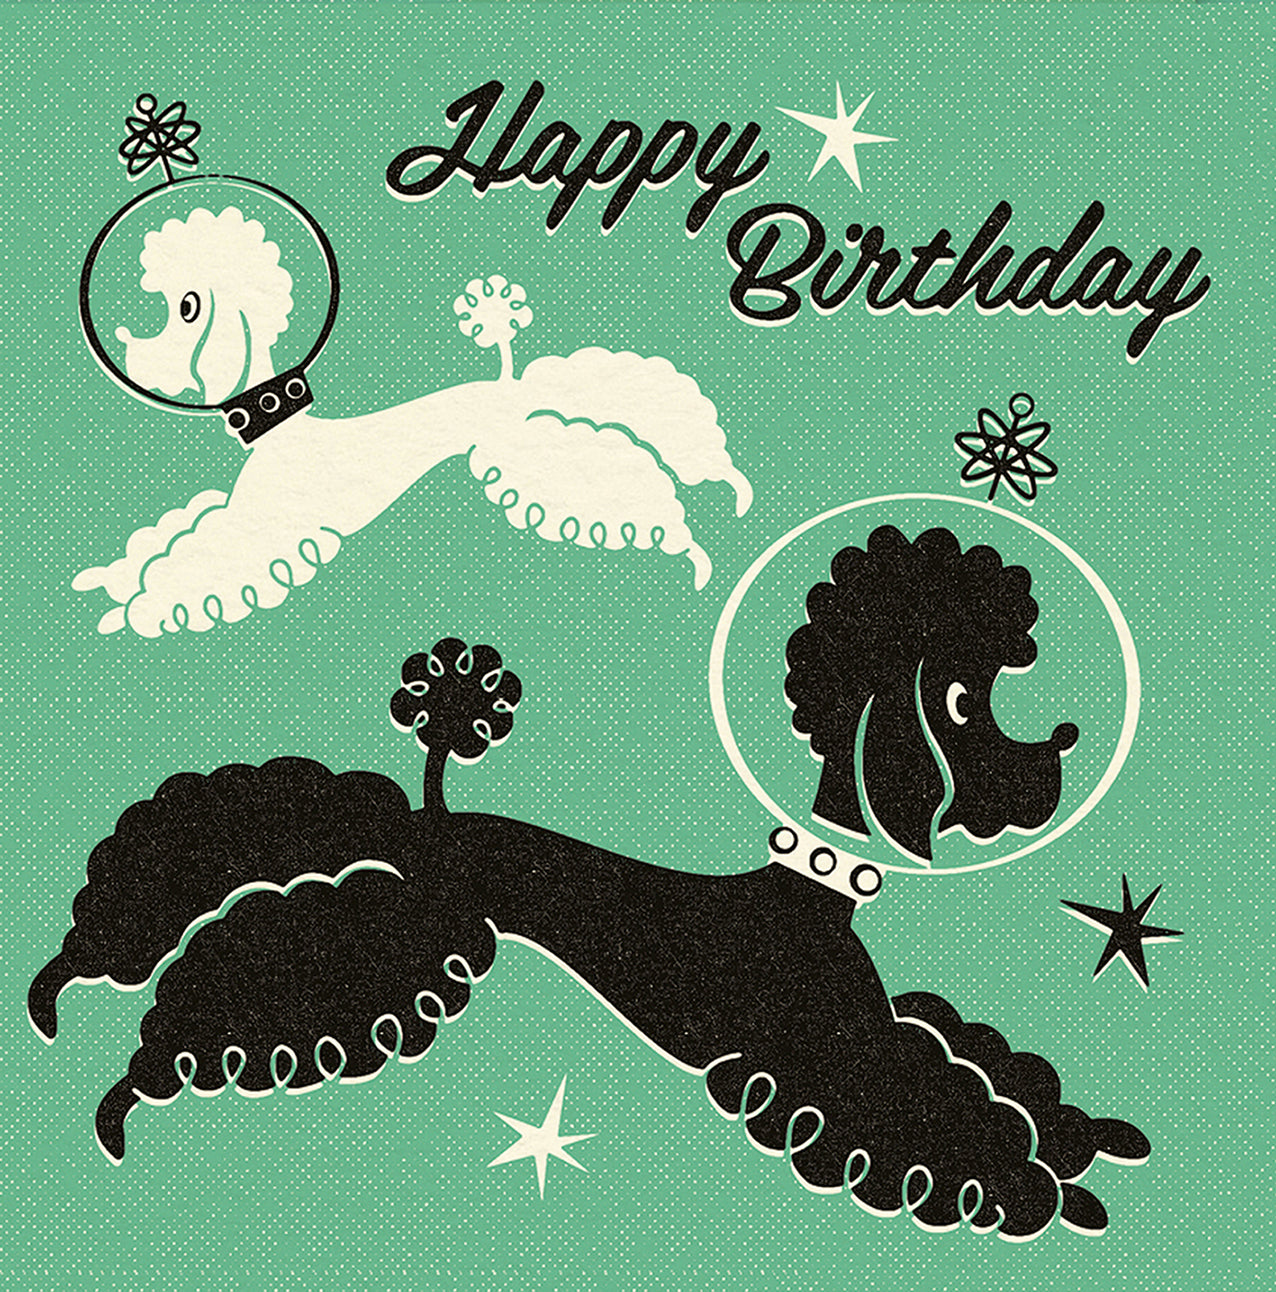 Pooch-A-Rama: Space Poodles Birthday Card